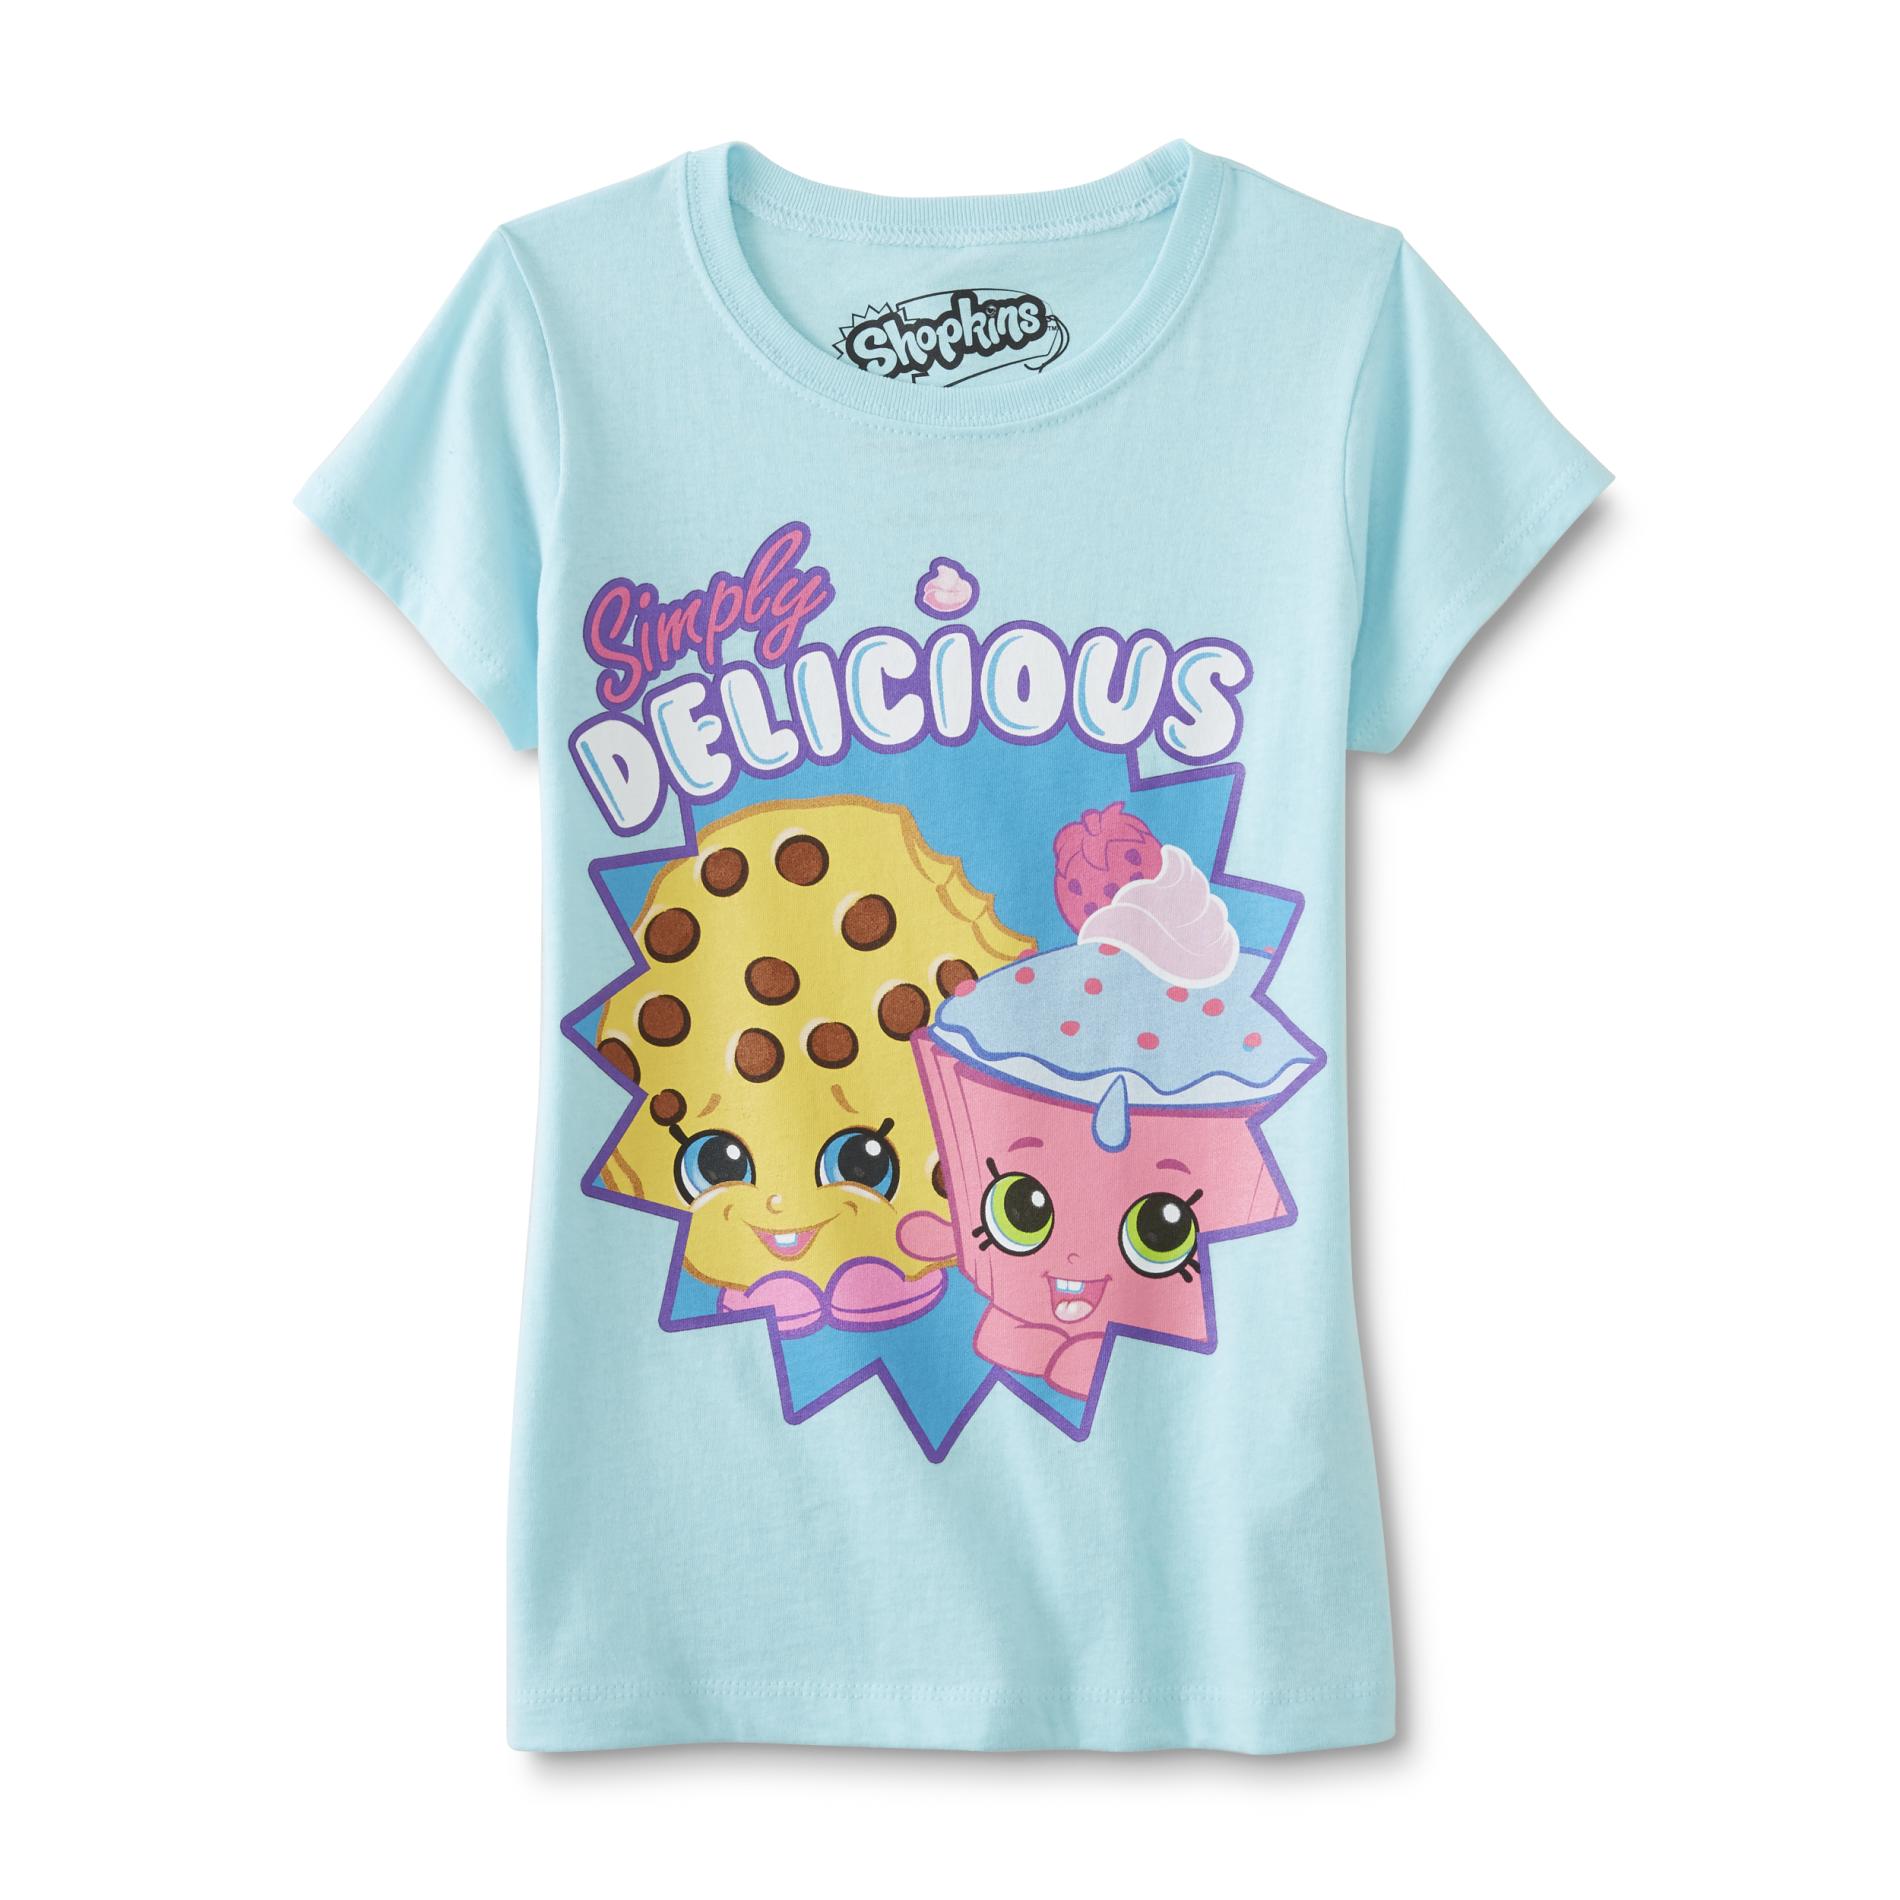 Shopkins Girls' Graphic T-Shirt - Simply Delicious